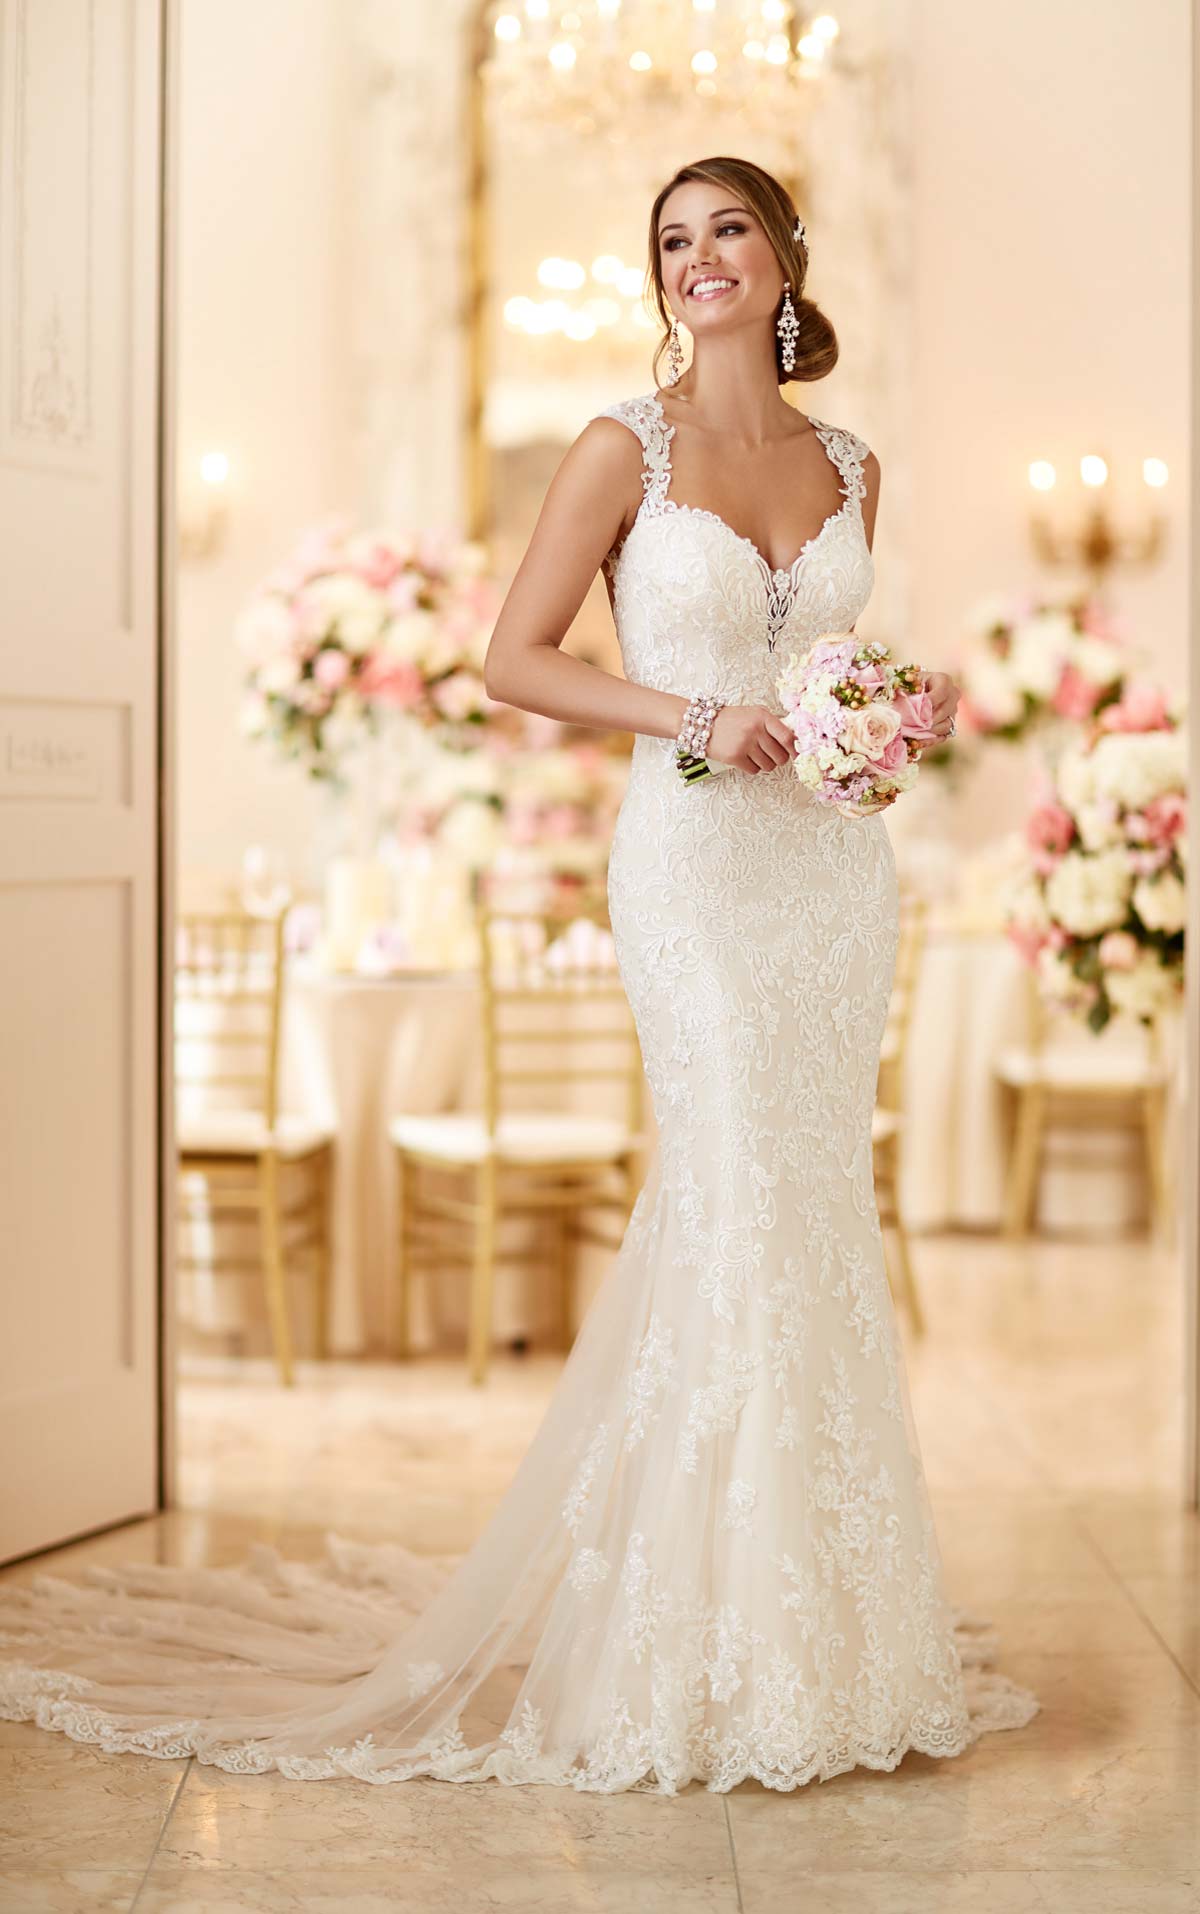 Intimate Bridal Gown Inspiration